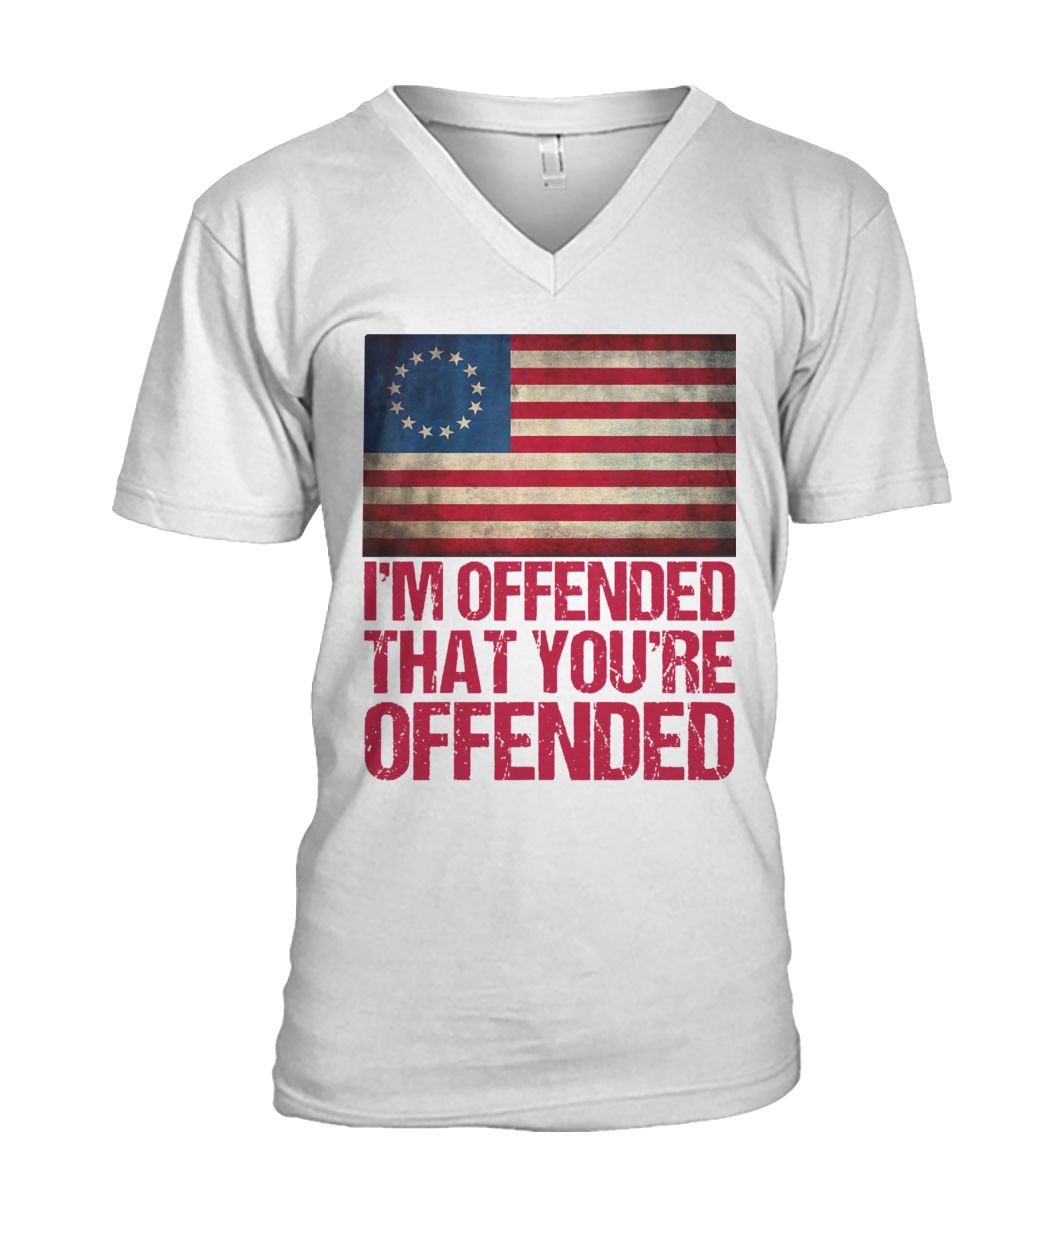 Old glory betsy ross i'm offended that you're offended mens v-neck